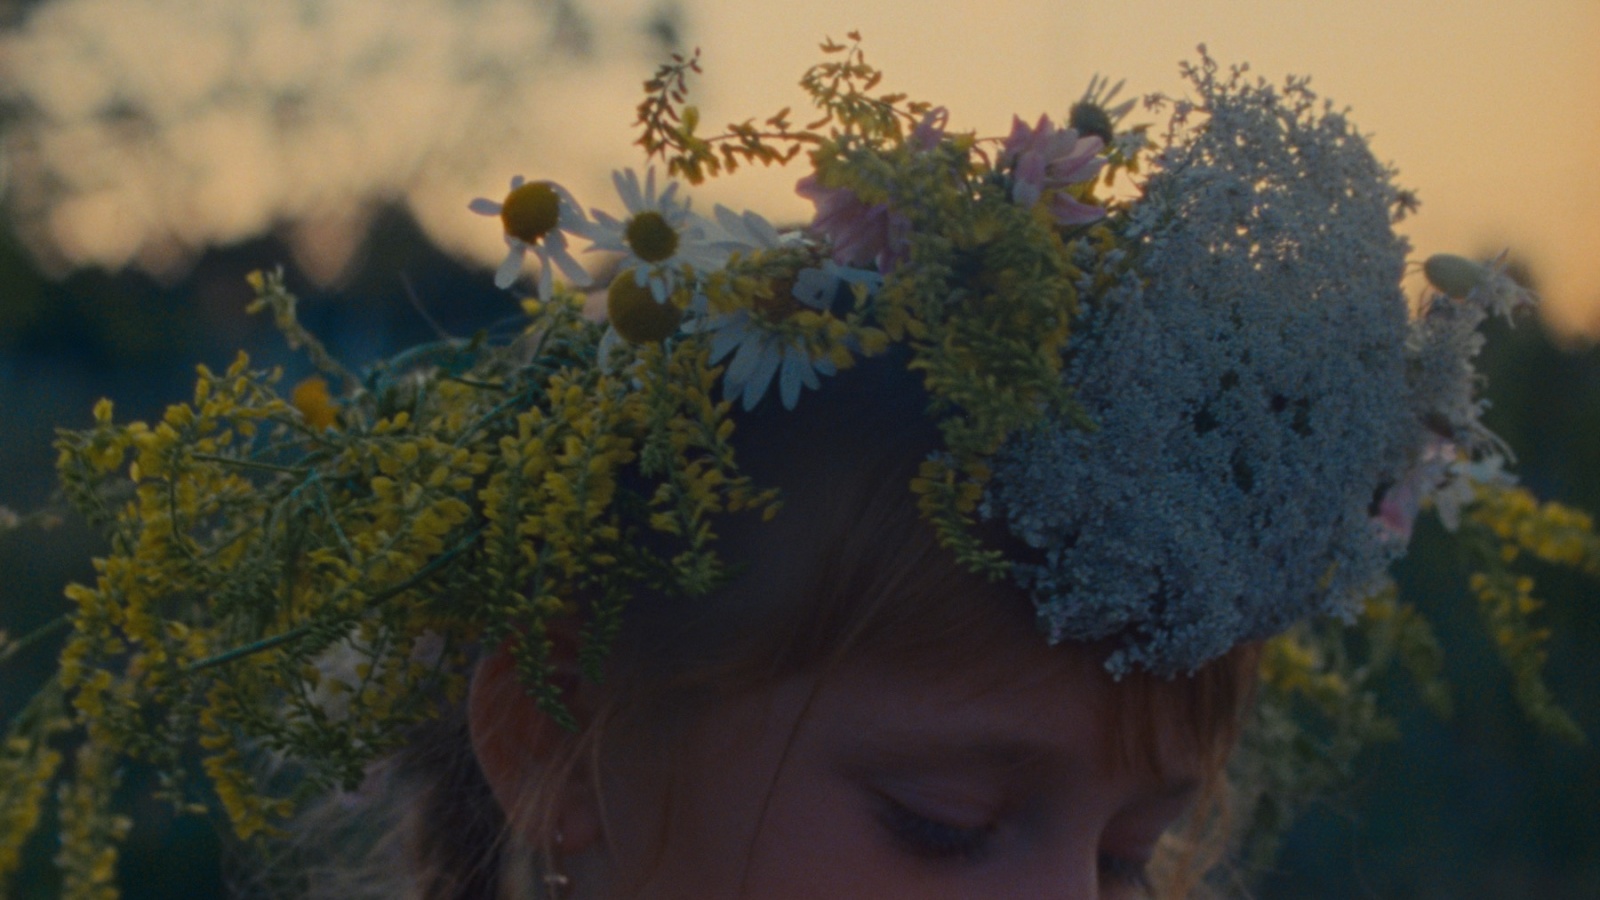 eng: A girl with a wreath of wild flowers on her head.